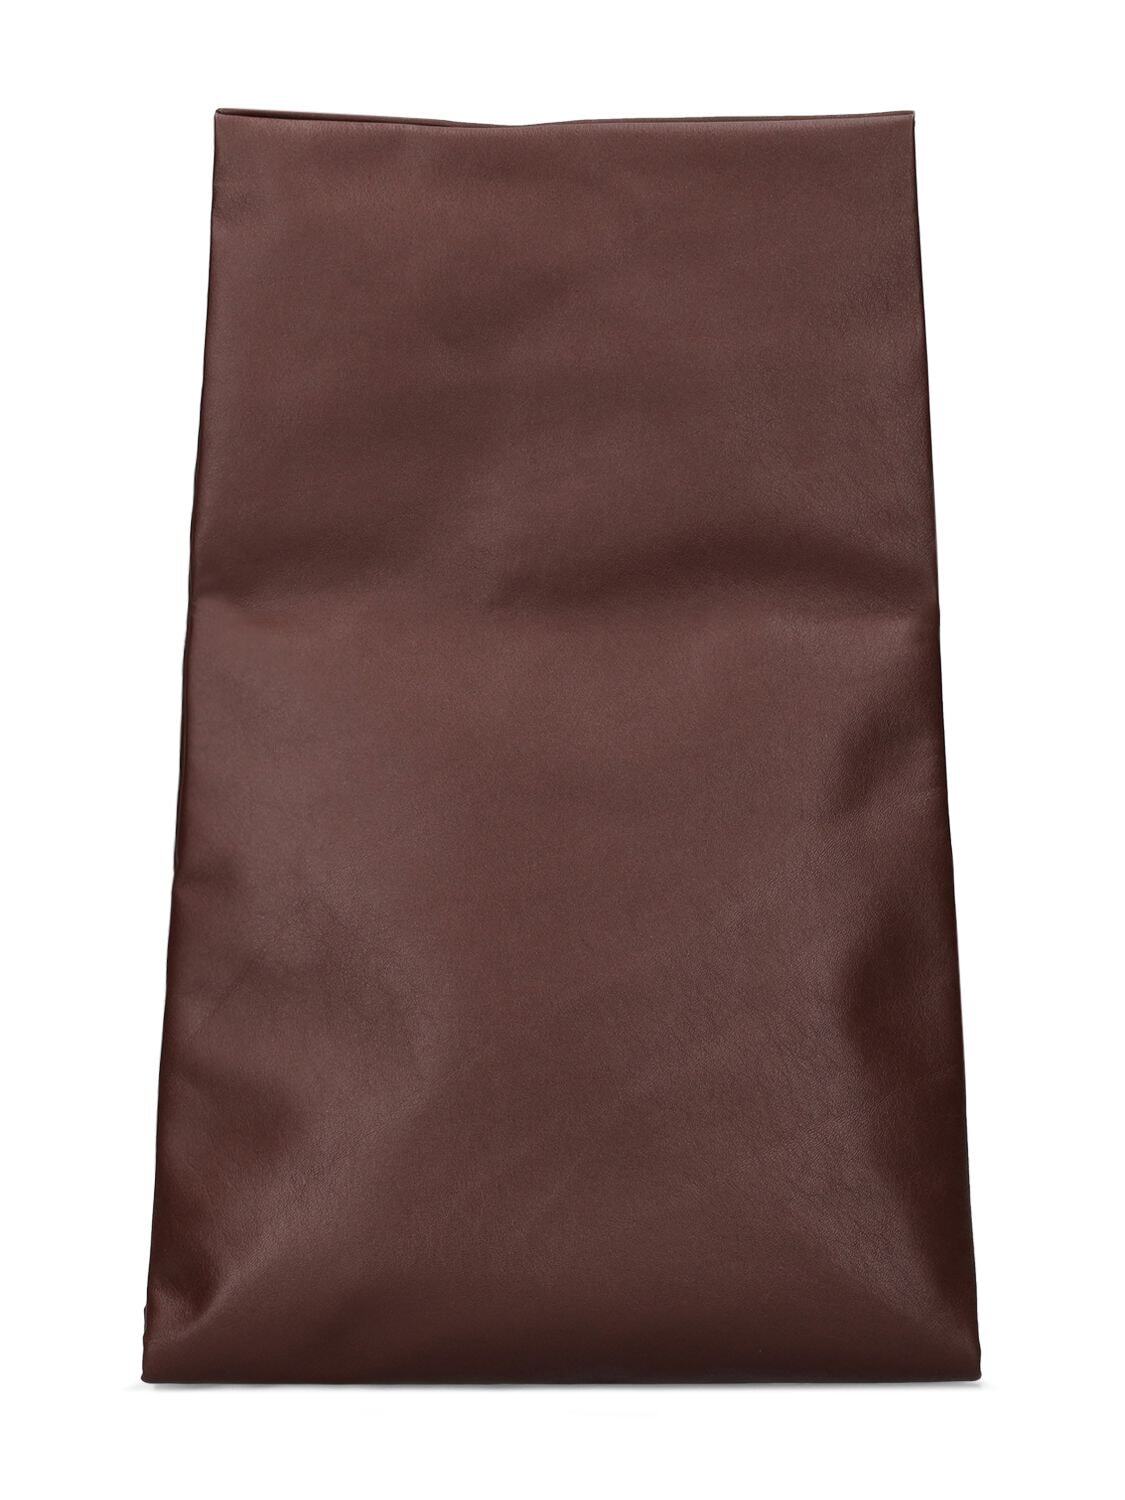 THE ROW Small Leather Glove Bag in chocolate